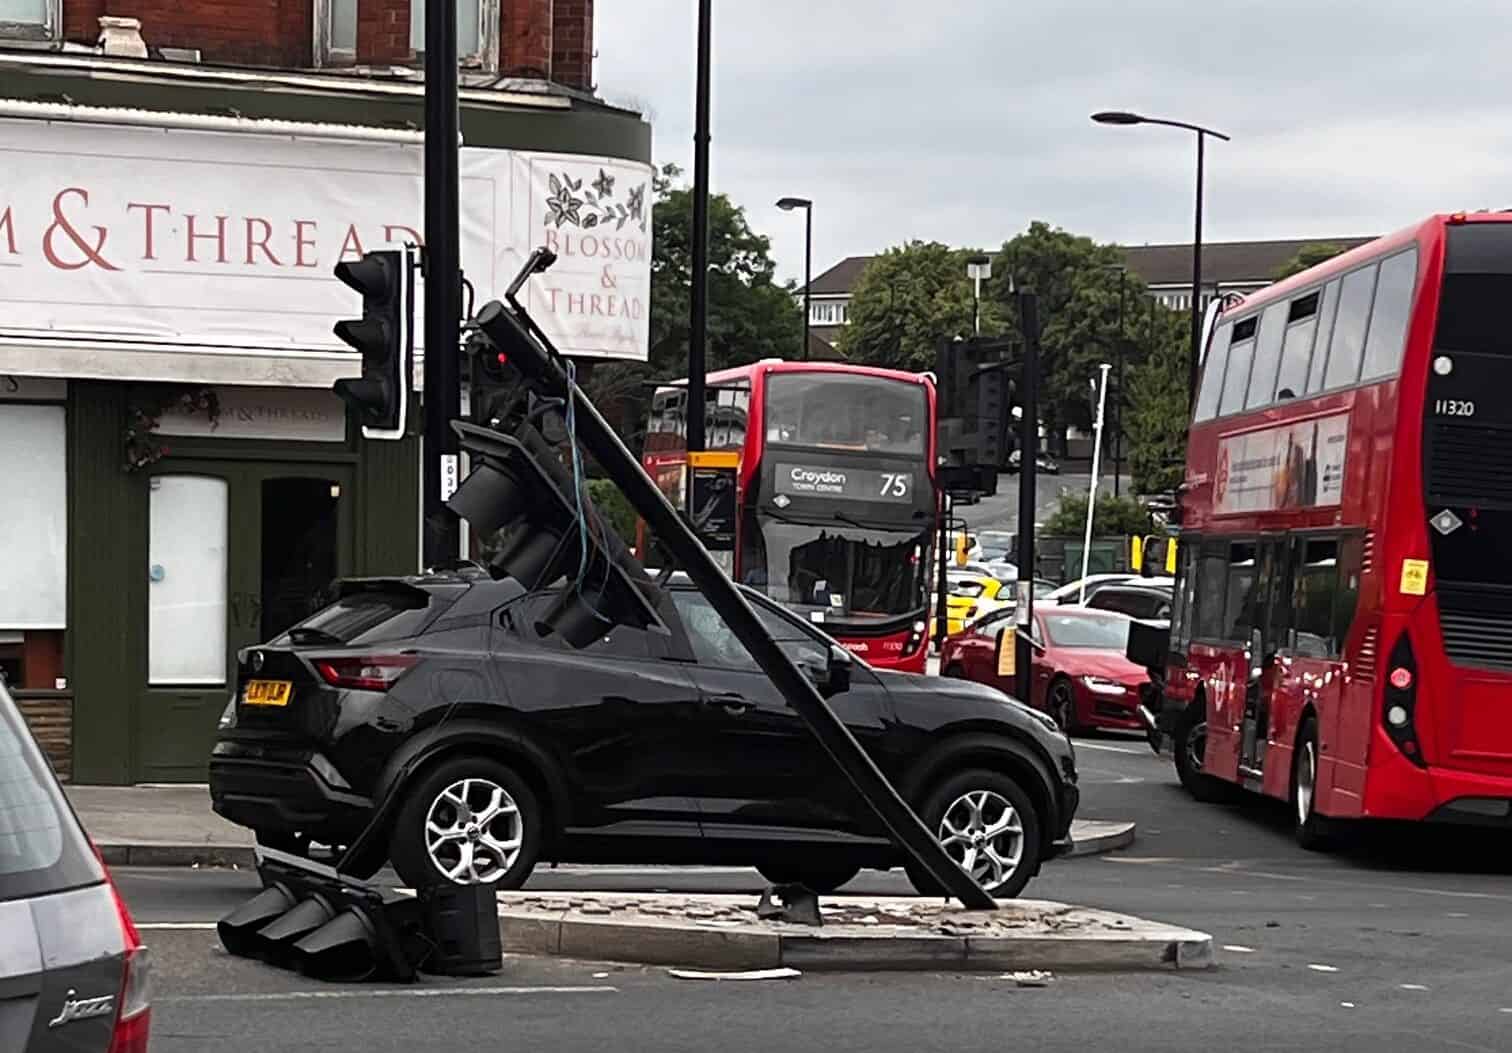 Locals call for action to improve a South London road where they claim accidents happen ‘once a month’